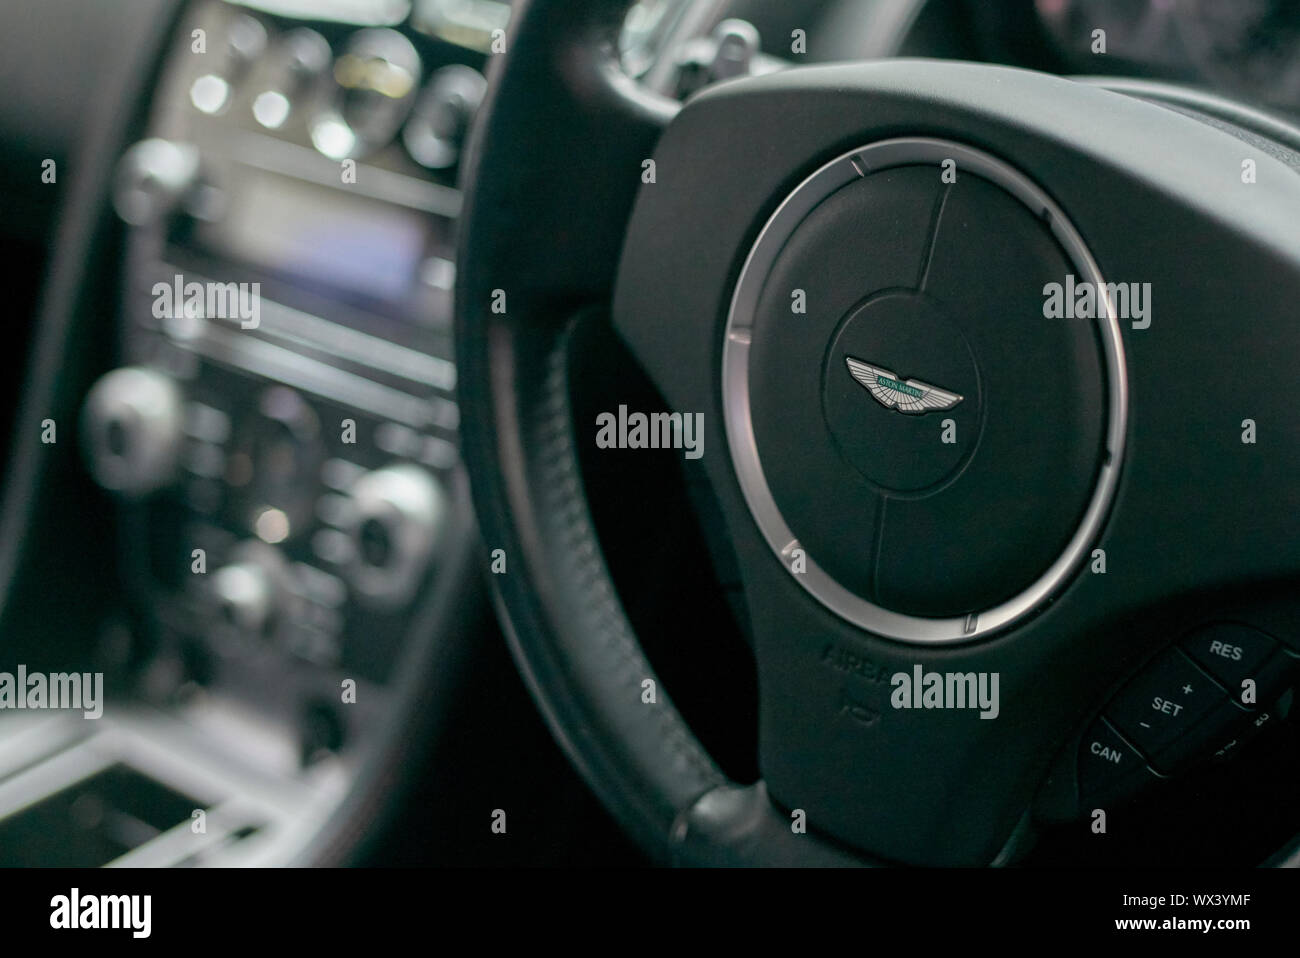 Interior View Of An Aston Martin Db9 Showing The Steering